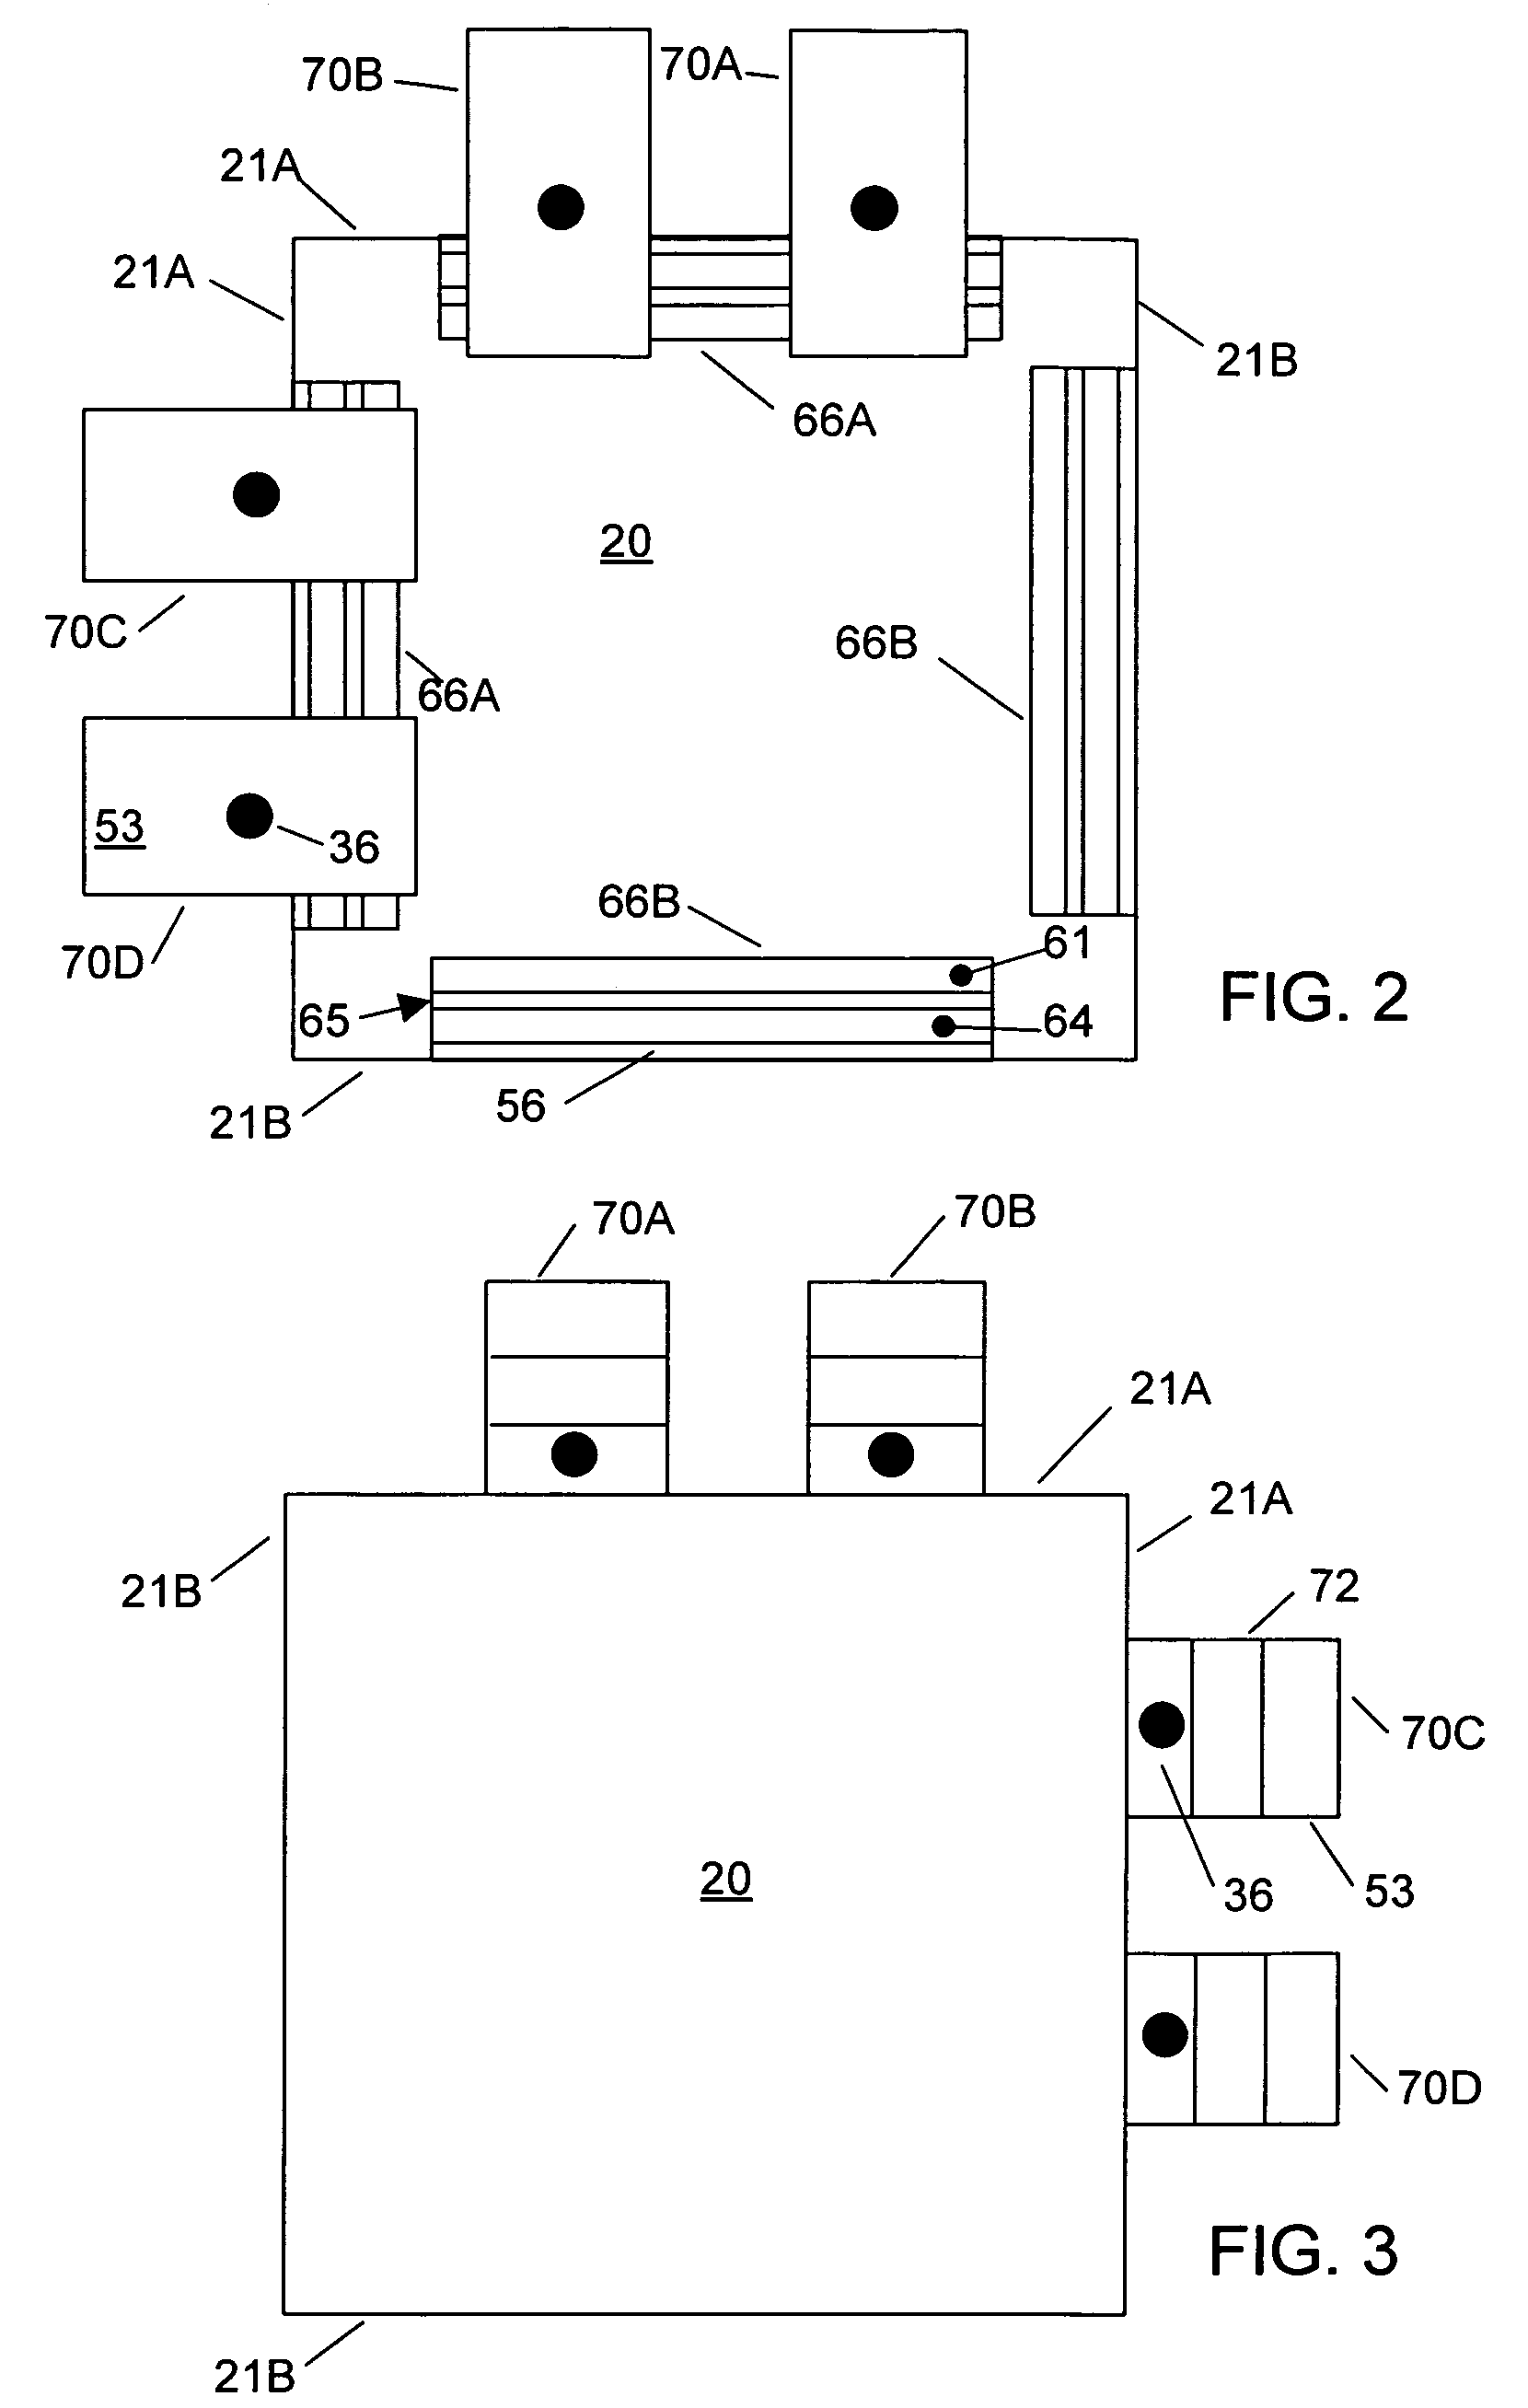 Attachment system for panel or facade